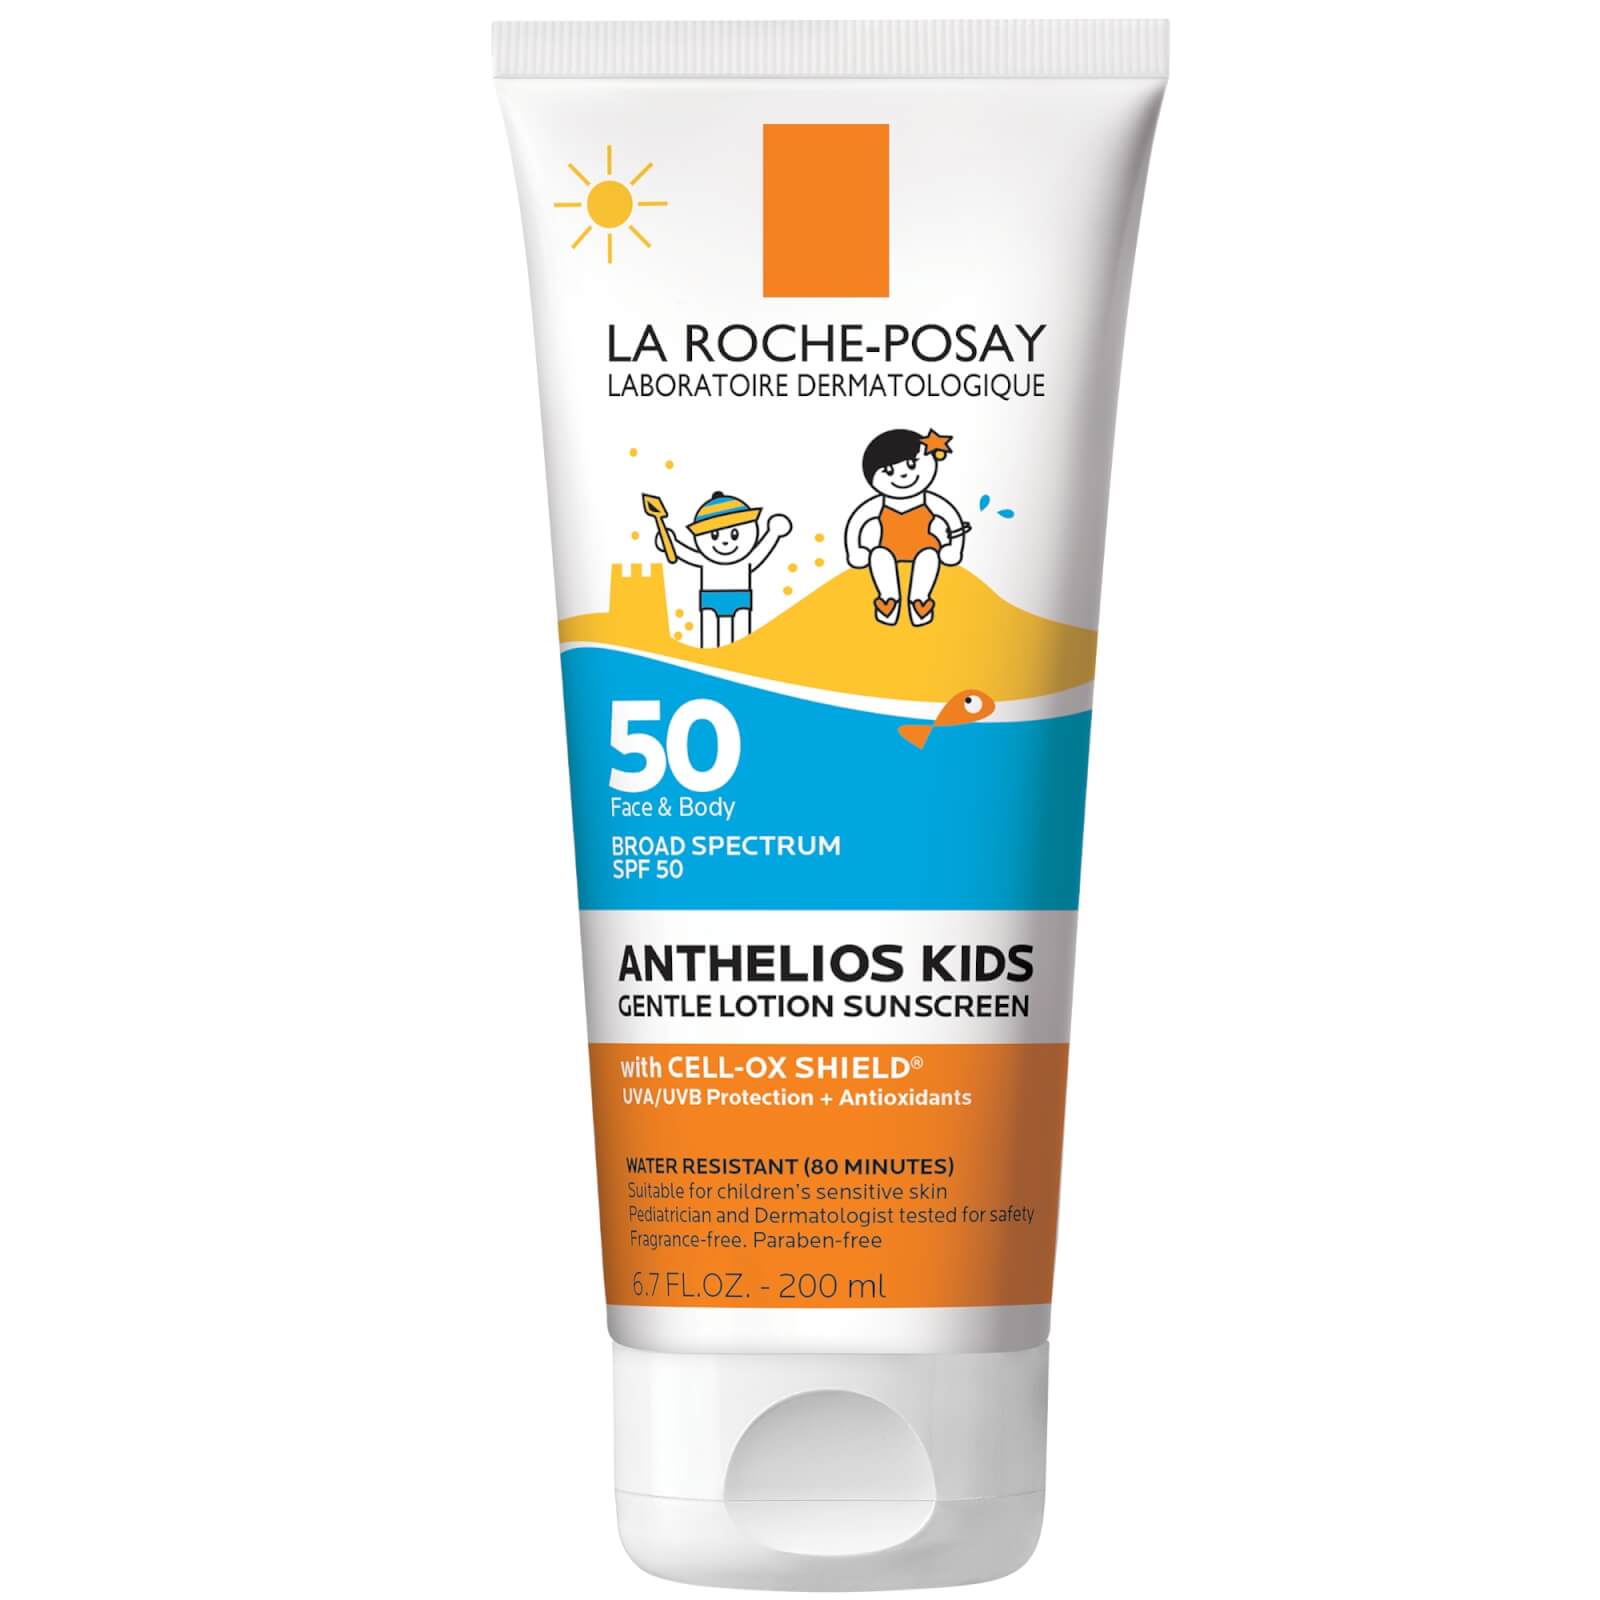 La Roche-posay Anthelios Kids Gentle Lotion Sunscreen Spf 50 (various Sizes)